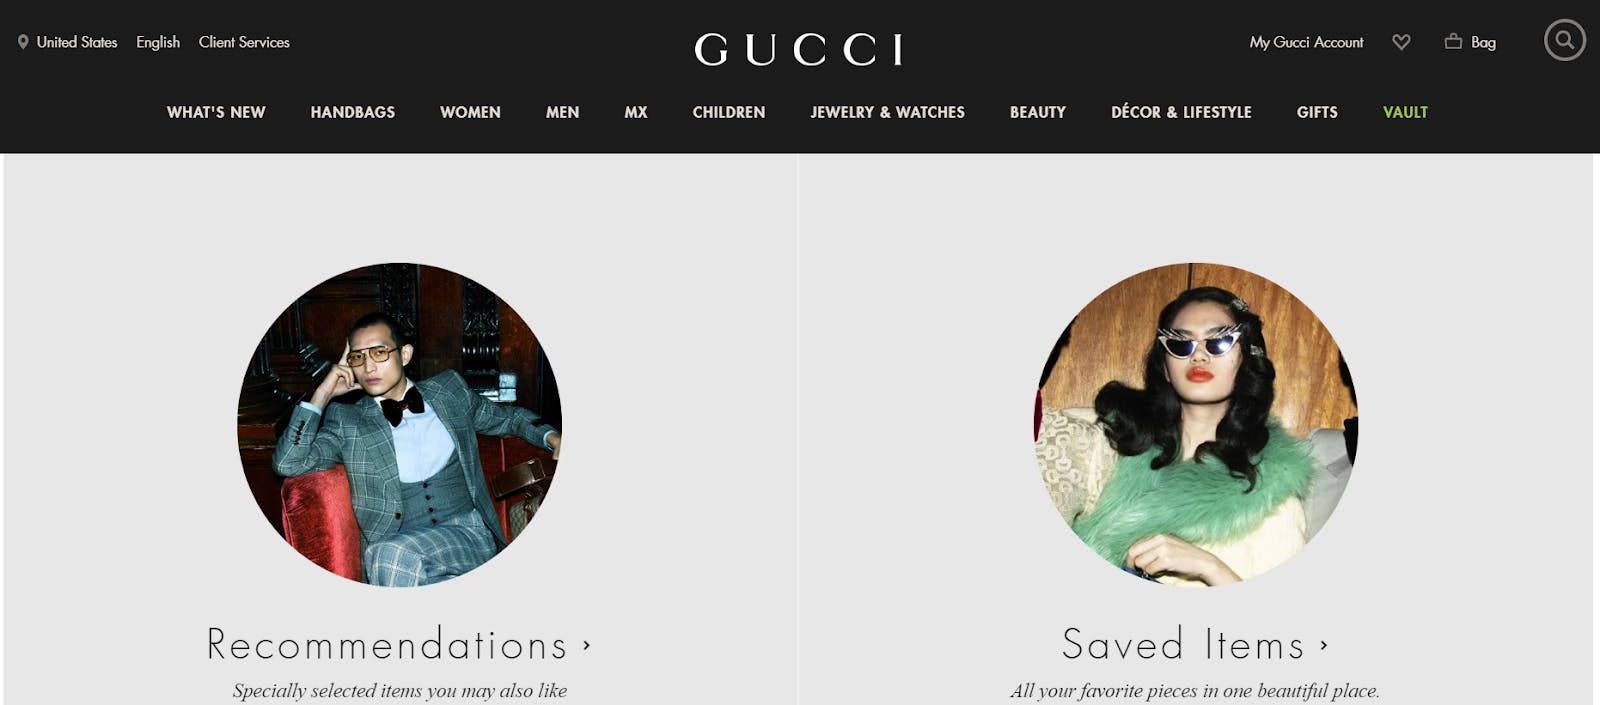 The Gucci membership signup page.